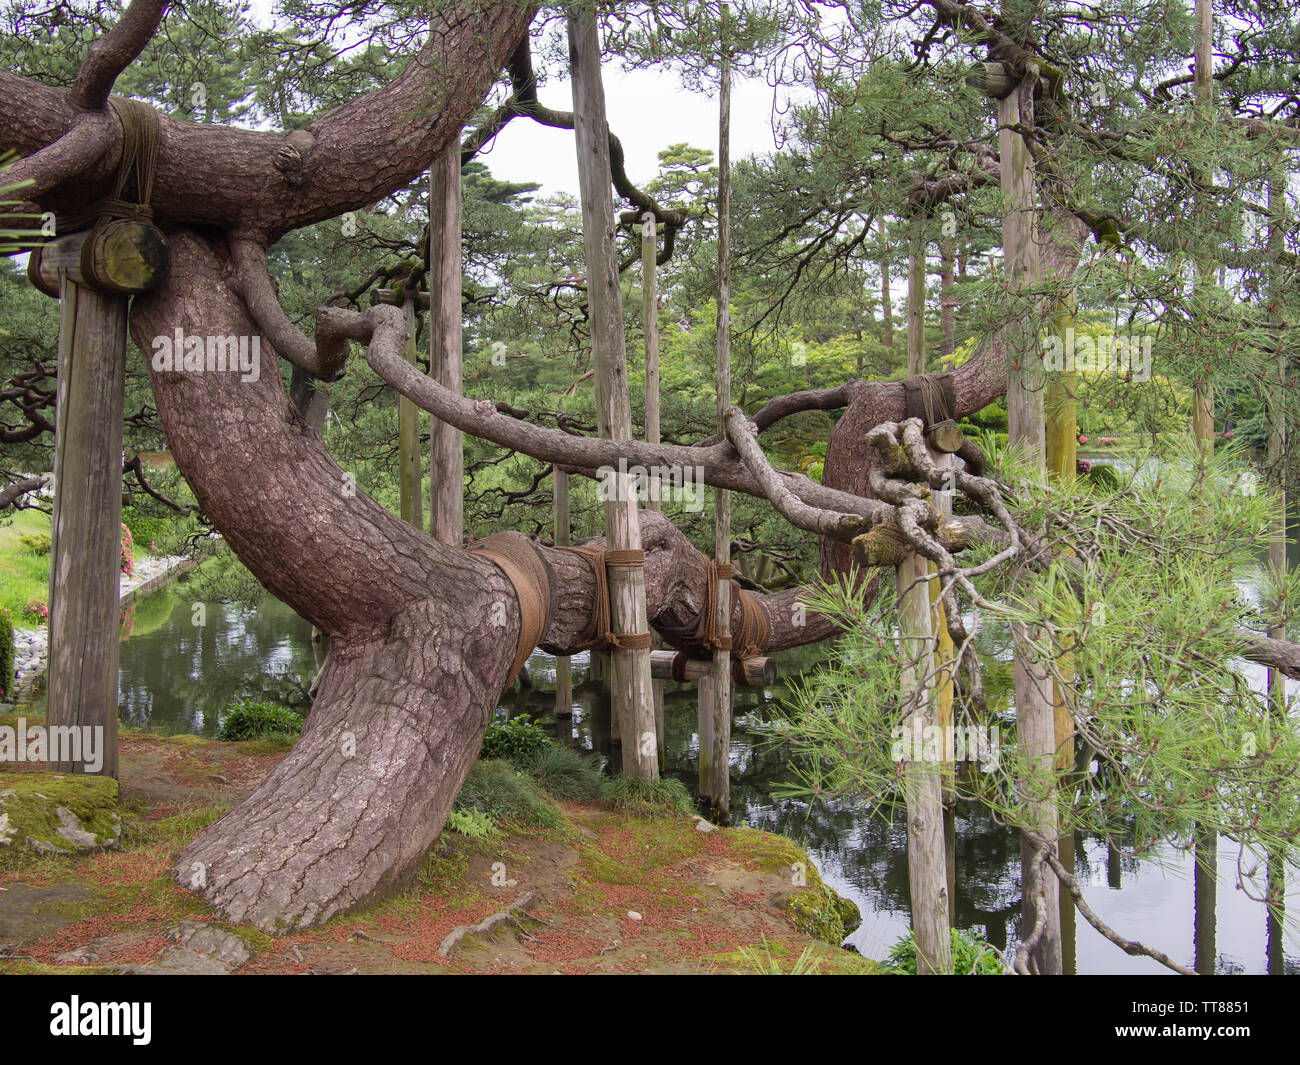 An ancient pine tree in Kenroku-en or the Six Attributes Garden in Kanazawa, Japan. Kenroku-en contains over 180 species of plants and over 8000 trees. Stock Photo